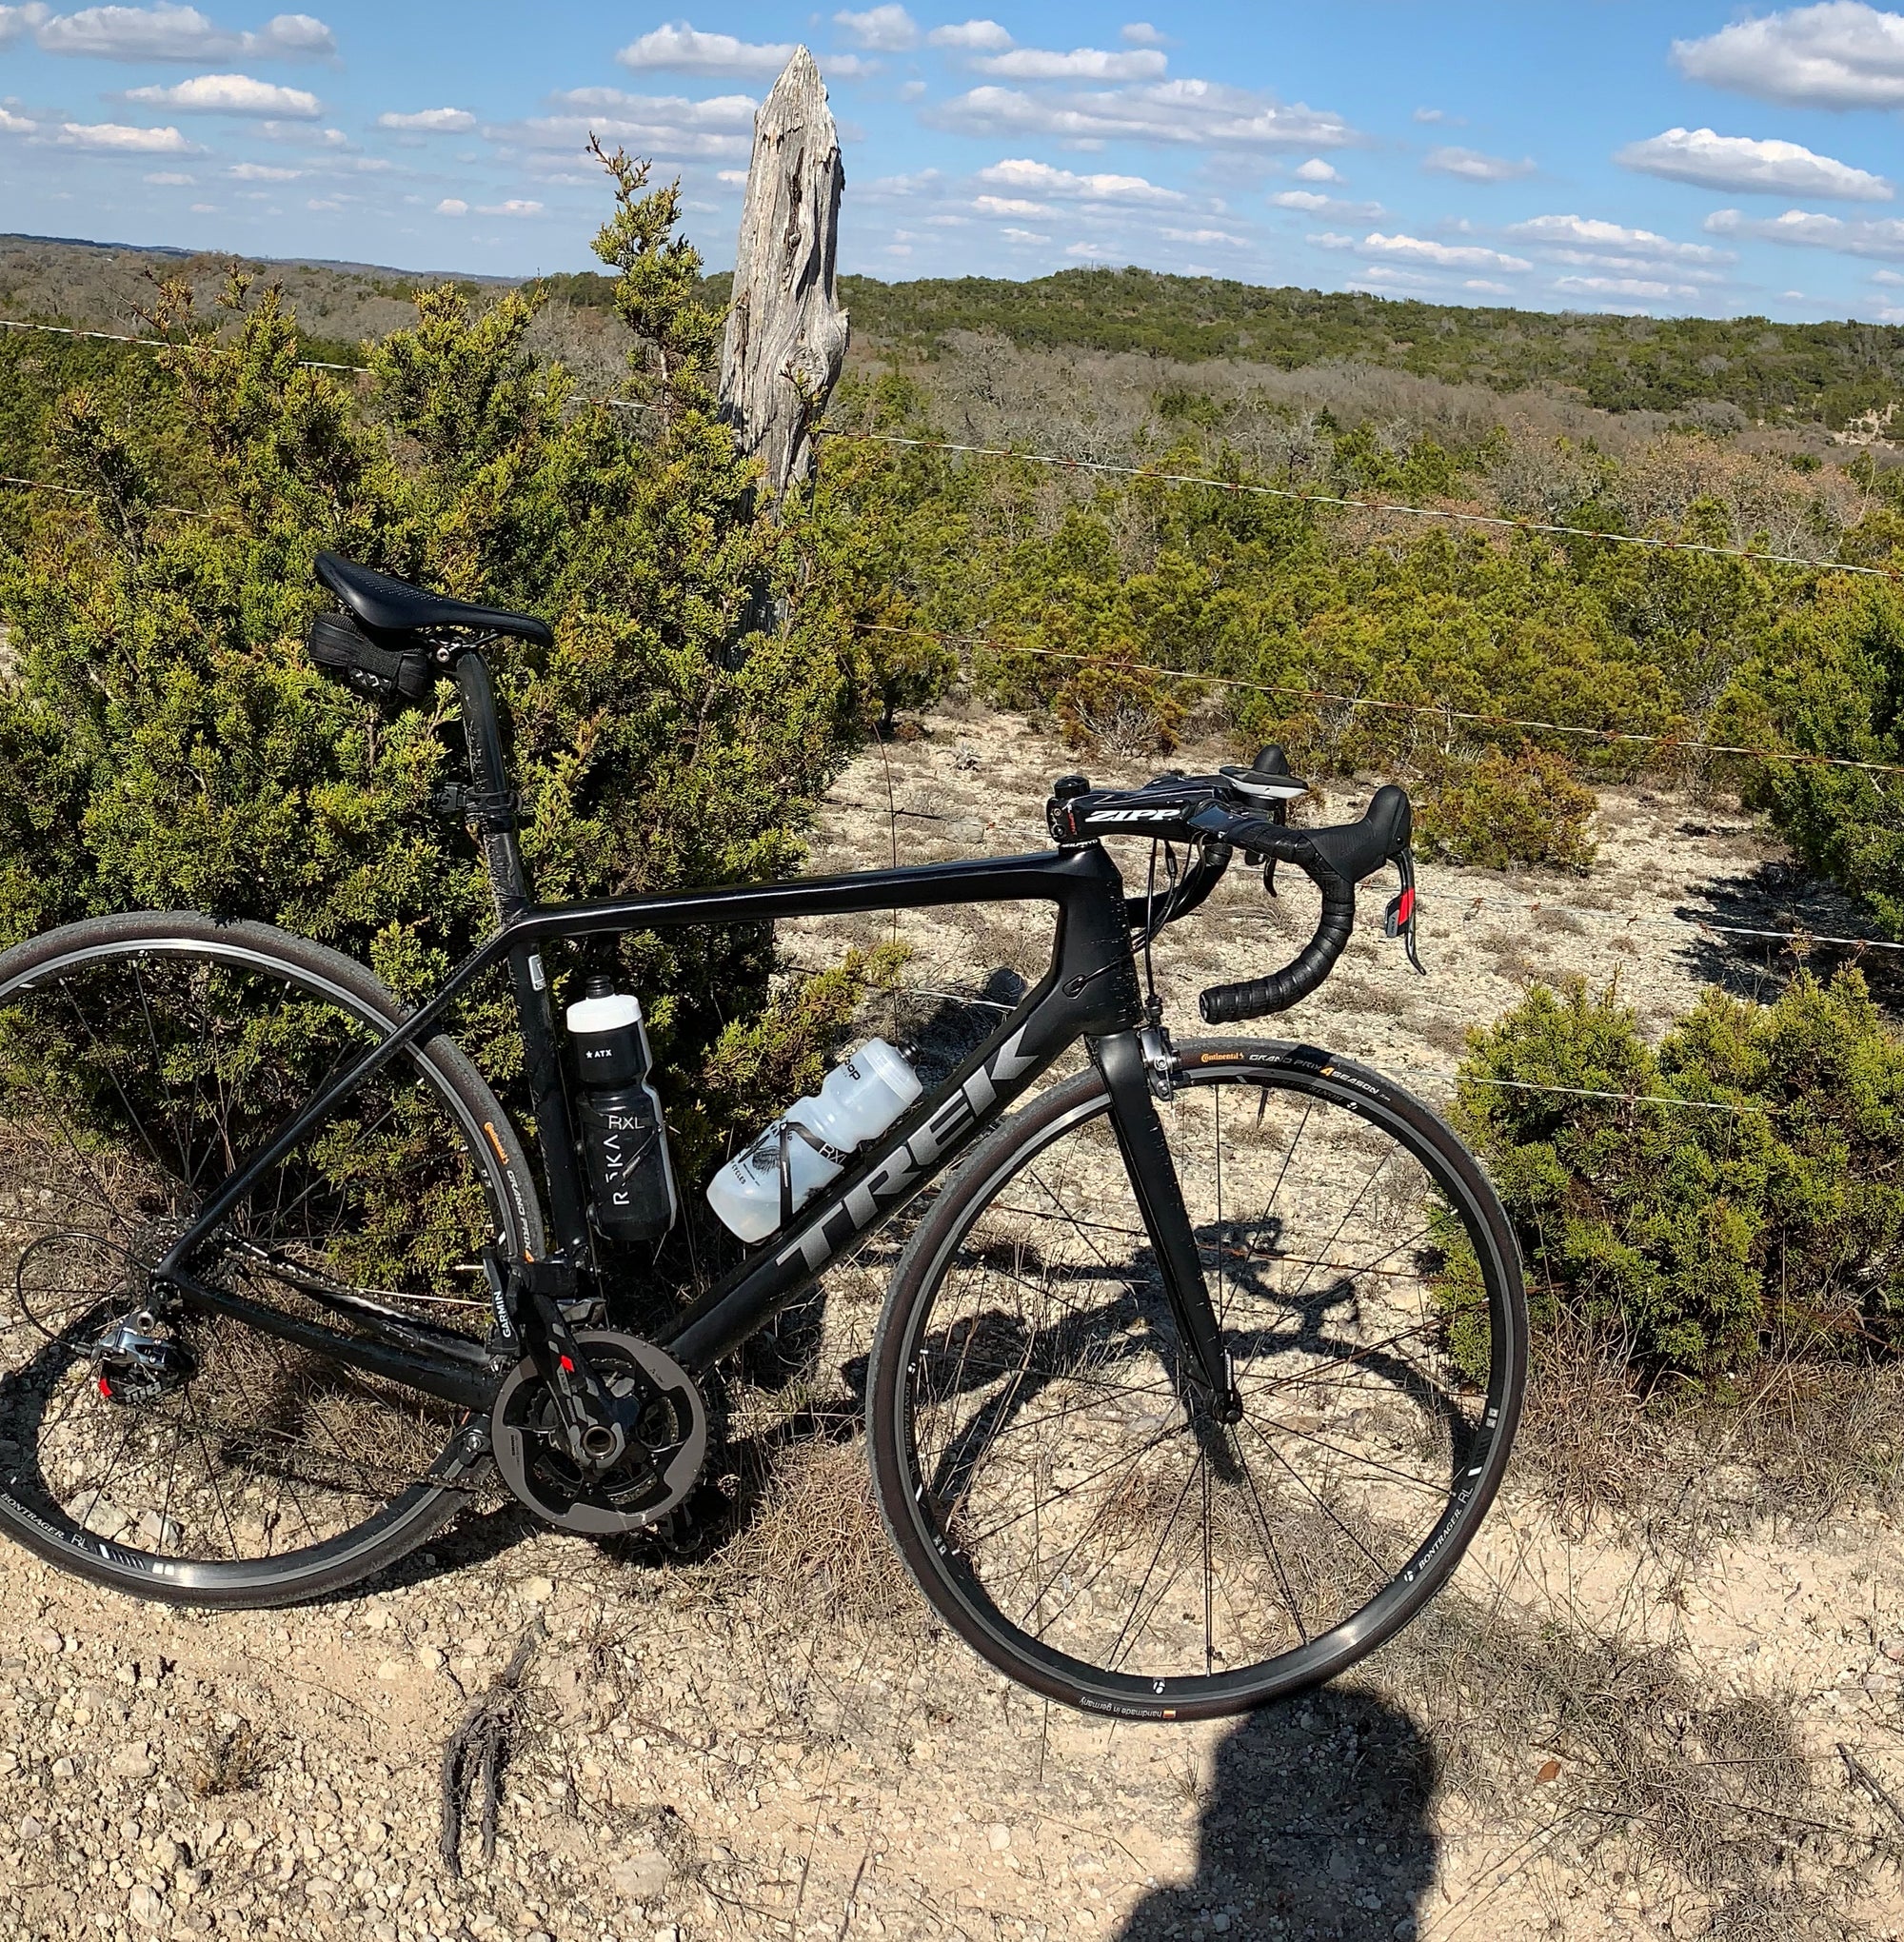 Used Trek road bike in front of Texas hill country view